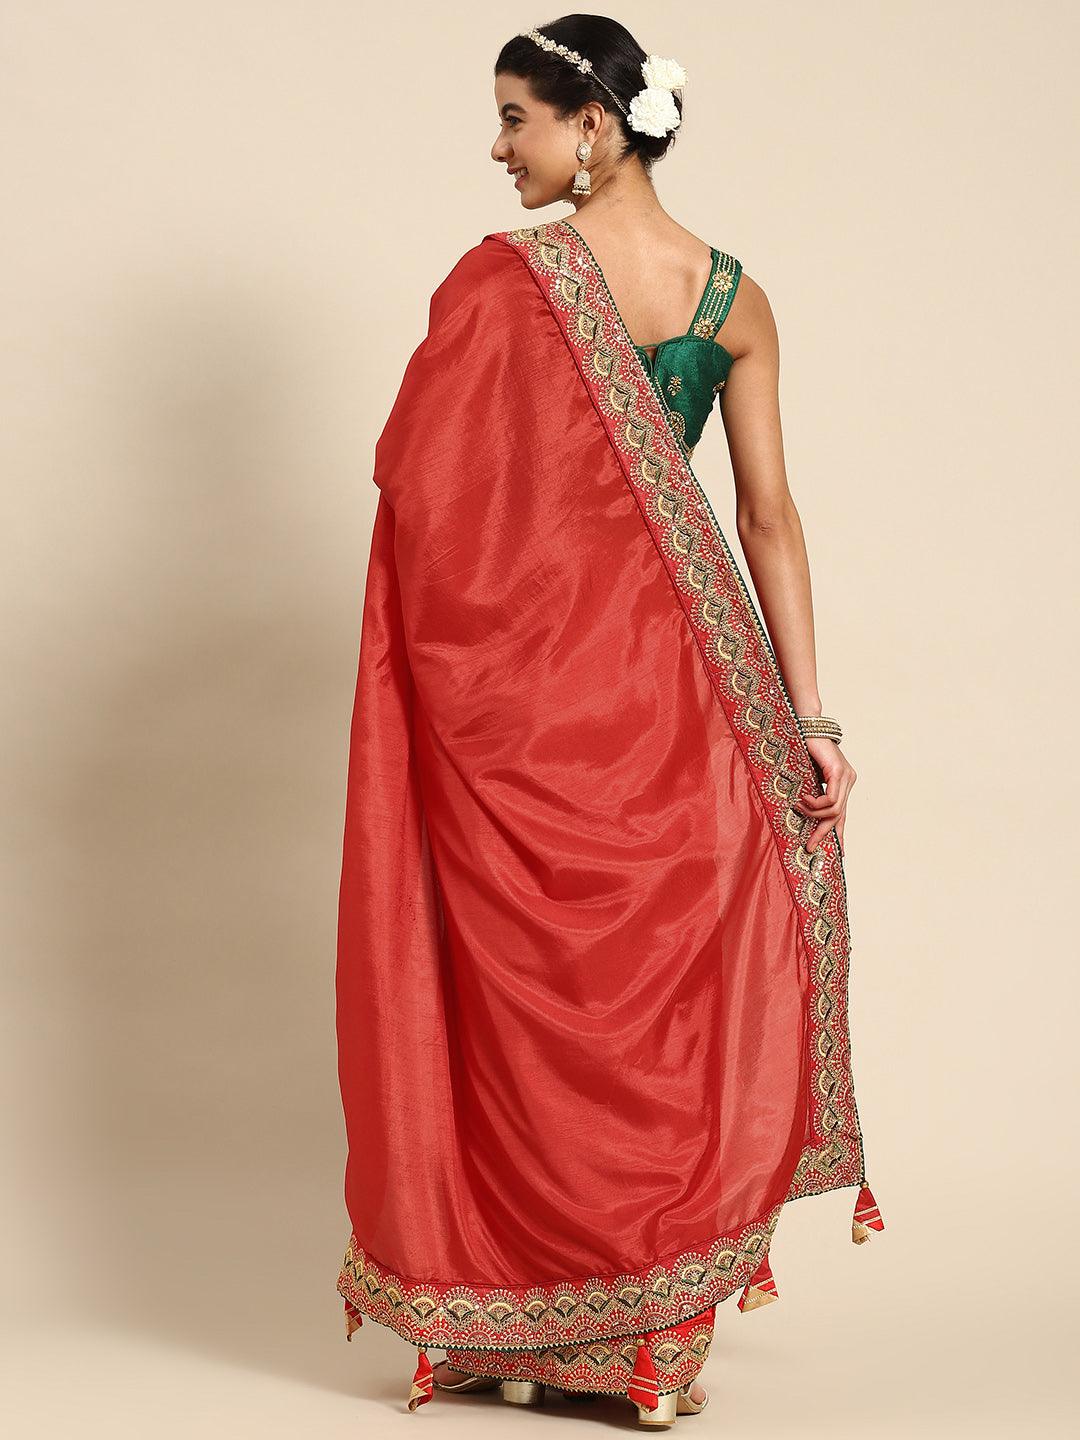 Trendy Classic Red Floral Embroidered Poly Cotton Saree - Indiakreations